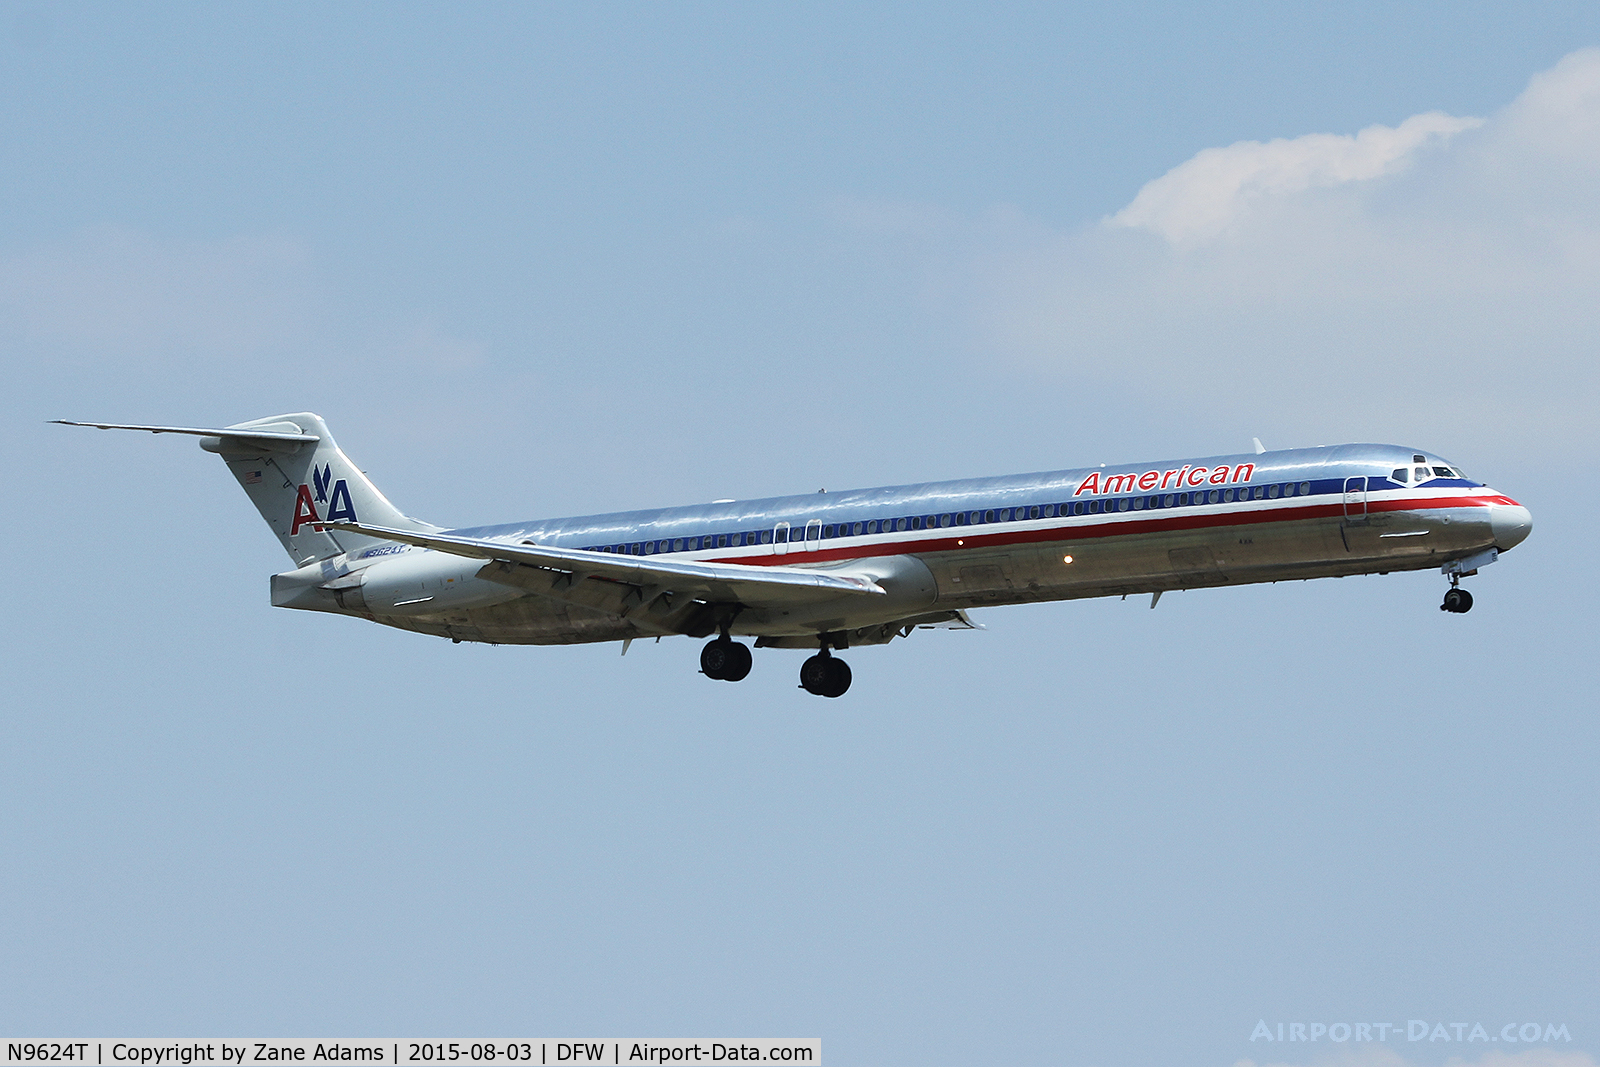 N9624T, 1998 McDonnell Douglas MD-83 (DC-9-83) C/N 53594, Arriving at DFW Airport